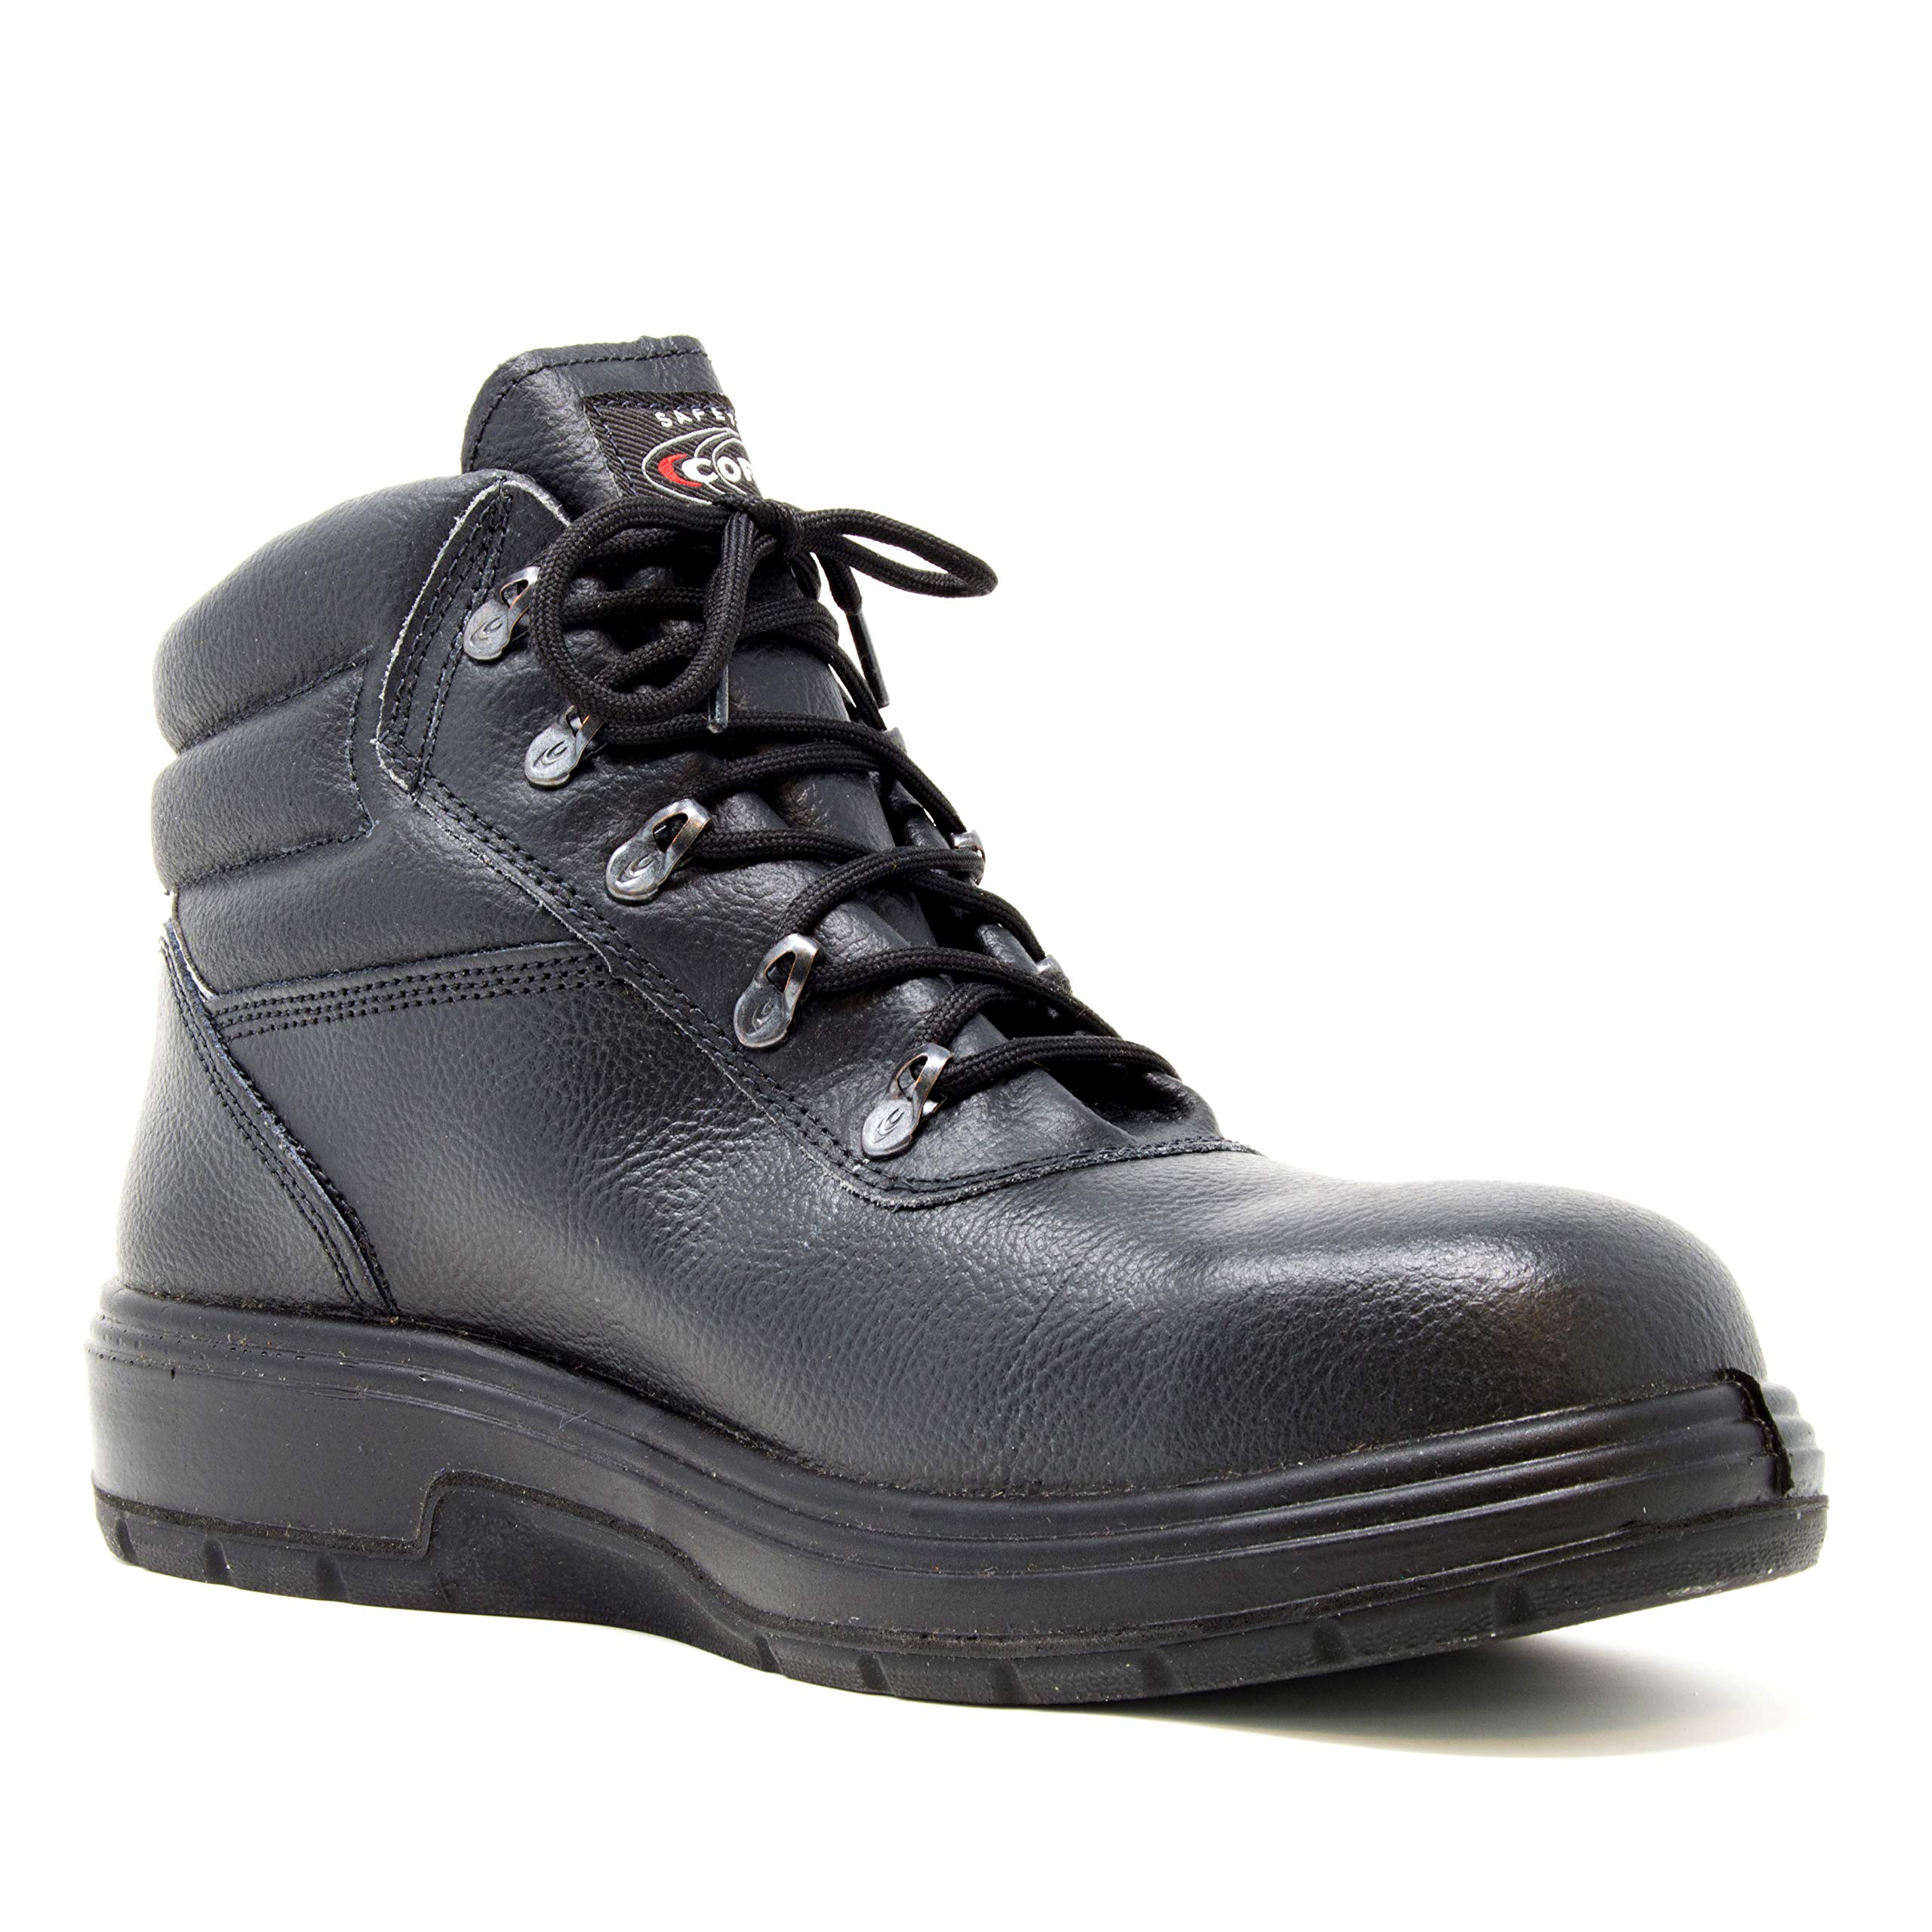 COFRA Leather Work Boots - NEW ASPHALT Treadless Footwear with Composite Safety Toe & Heat Defender Nitrile Rubber Outsole - Size 8